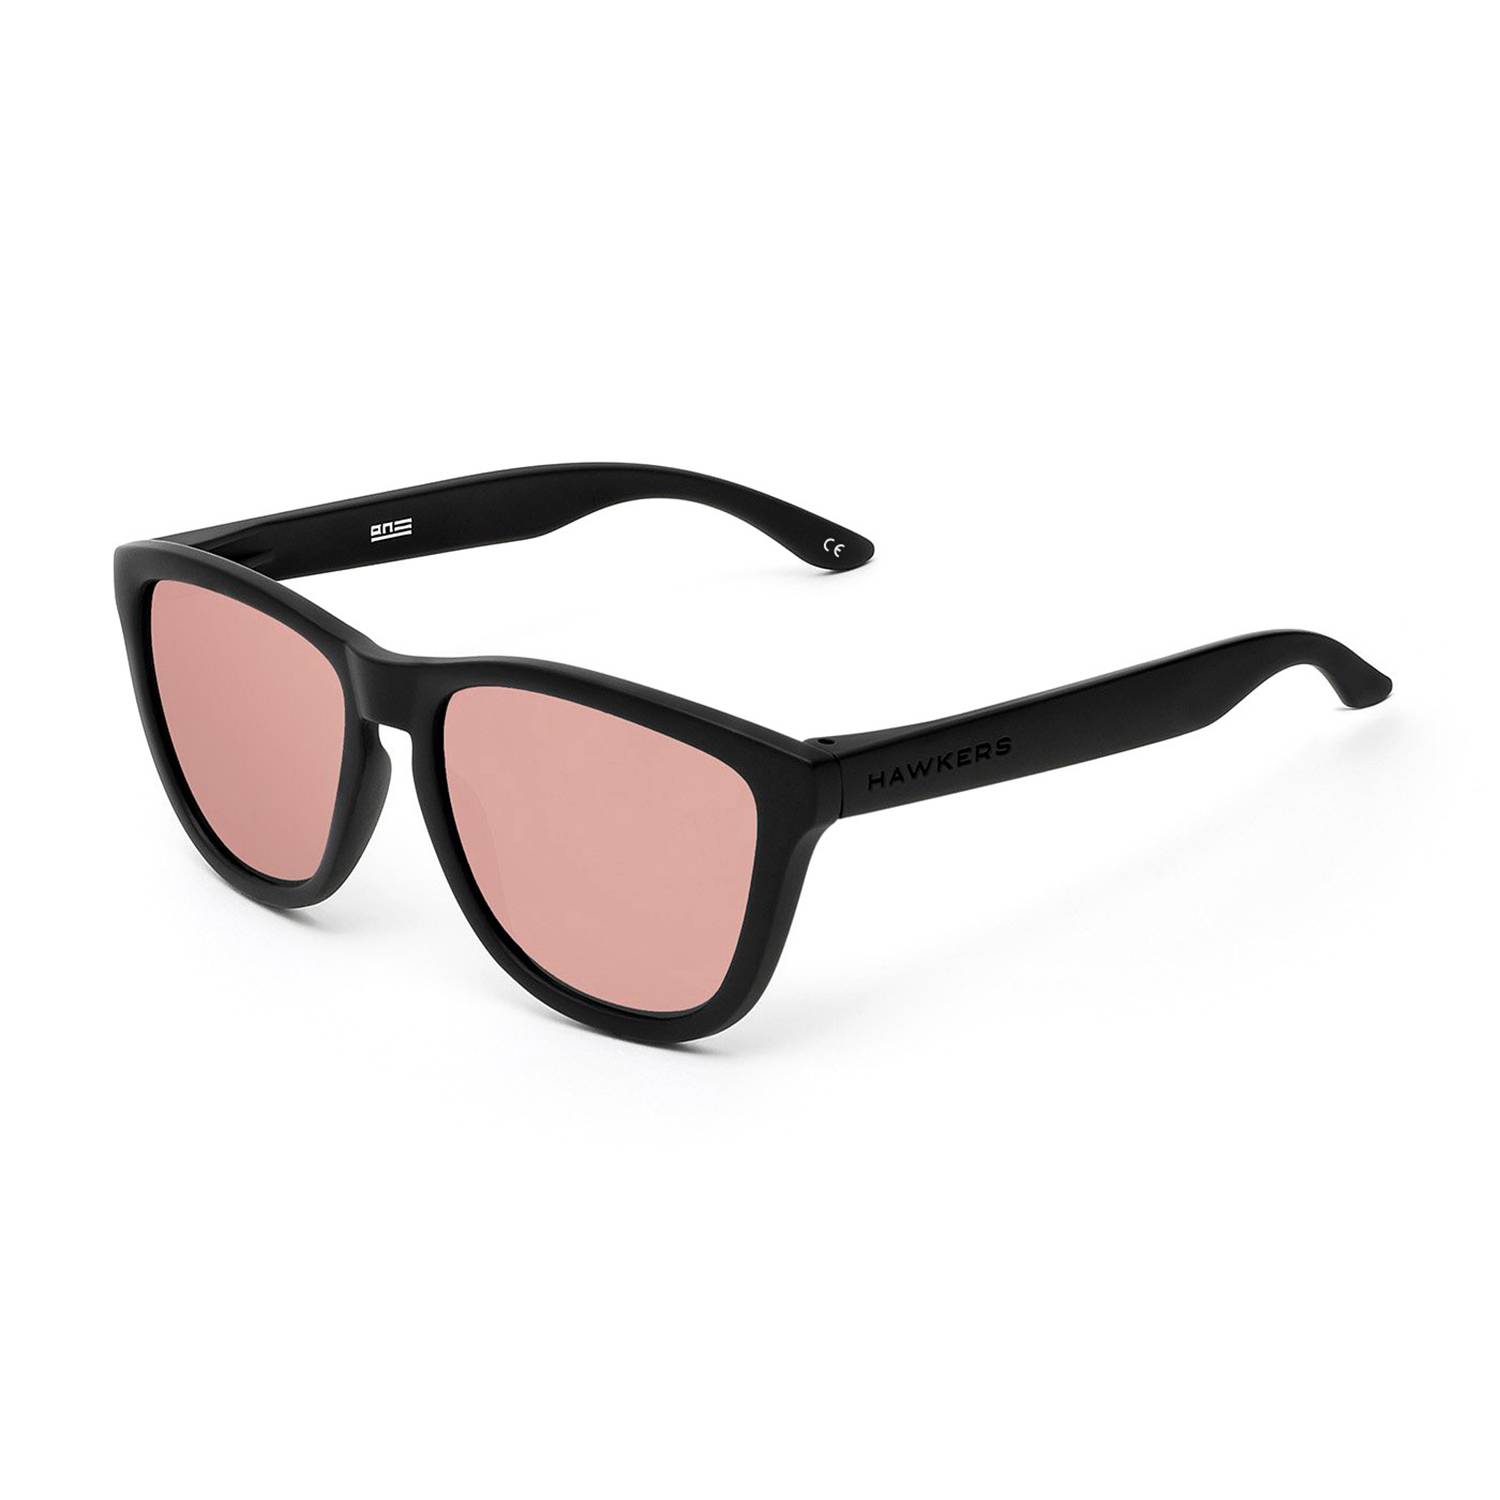 Gafas de sol HAWKERS para Mujer - ONE POLARIZED BLACK ROSE GOLD HAWKERS